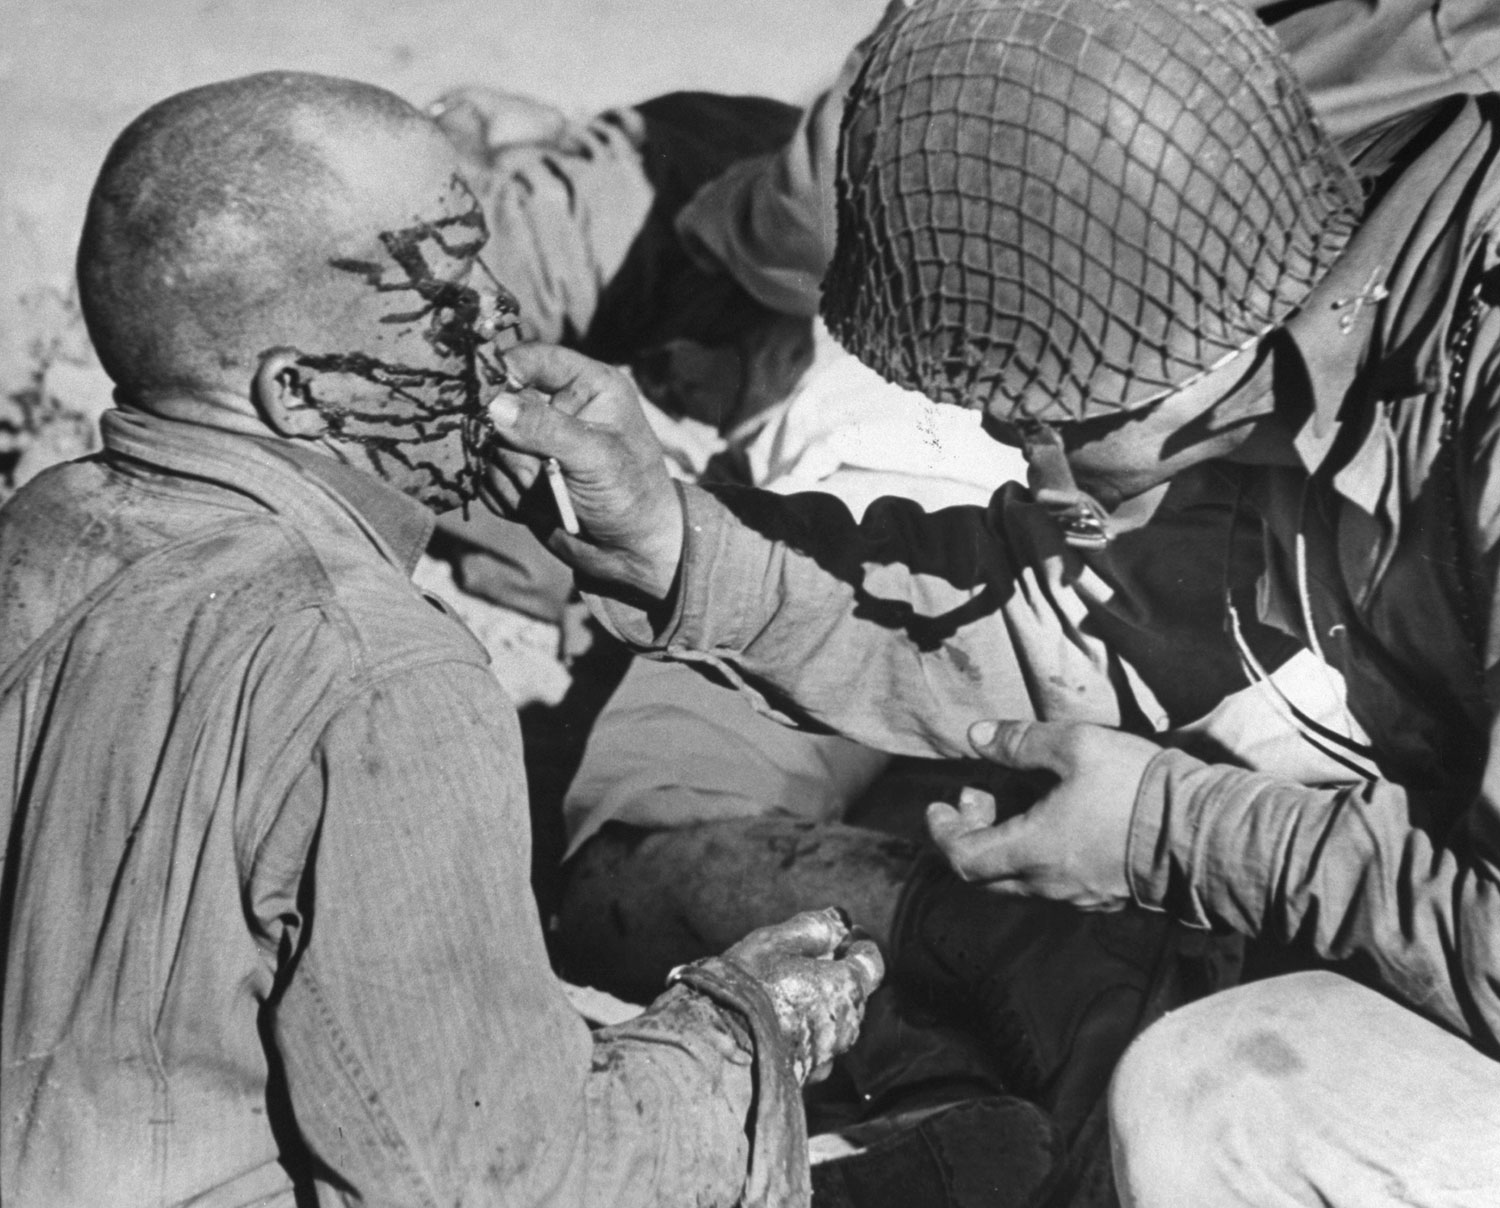 Bespattered with blood and oil after strafing attack by nine Me-109s [Messerschmitts] on first day of battle, a wounded half-track gunner vainly tries to swallow a sulfa tablet. Attending officer subsequently flushed it down his throat with water. Three other men on the half-track were killed.